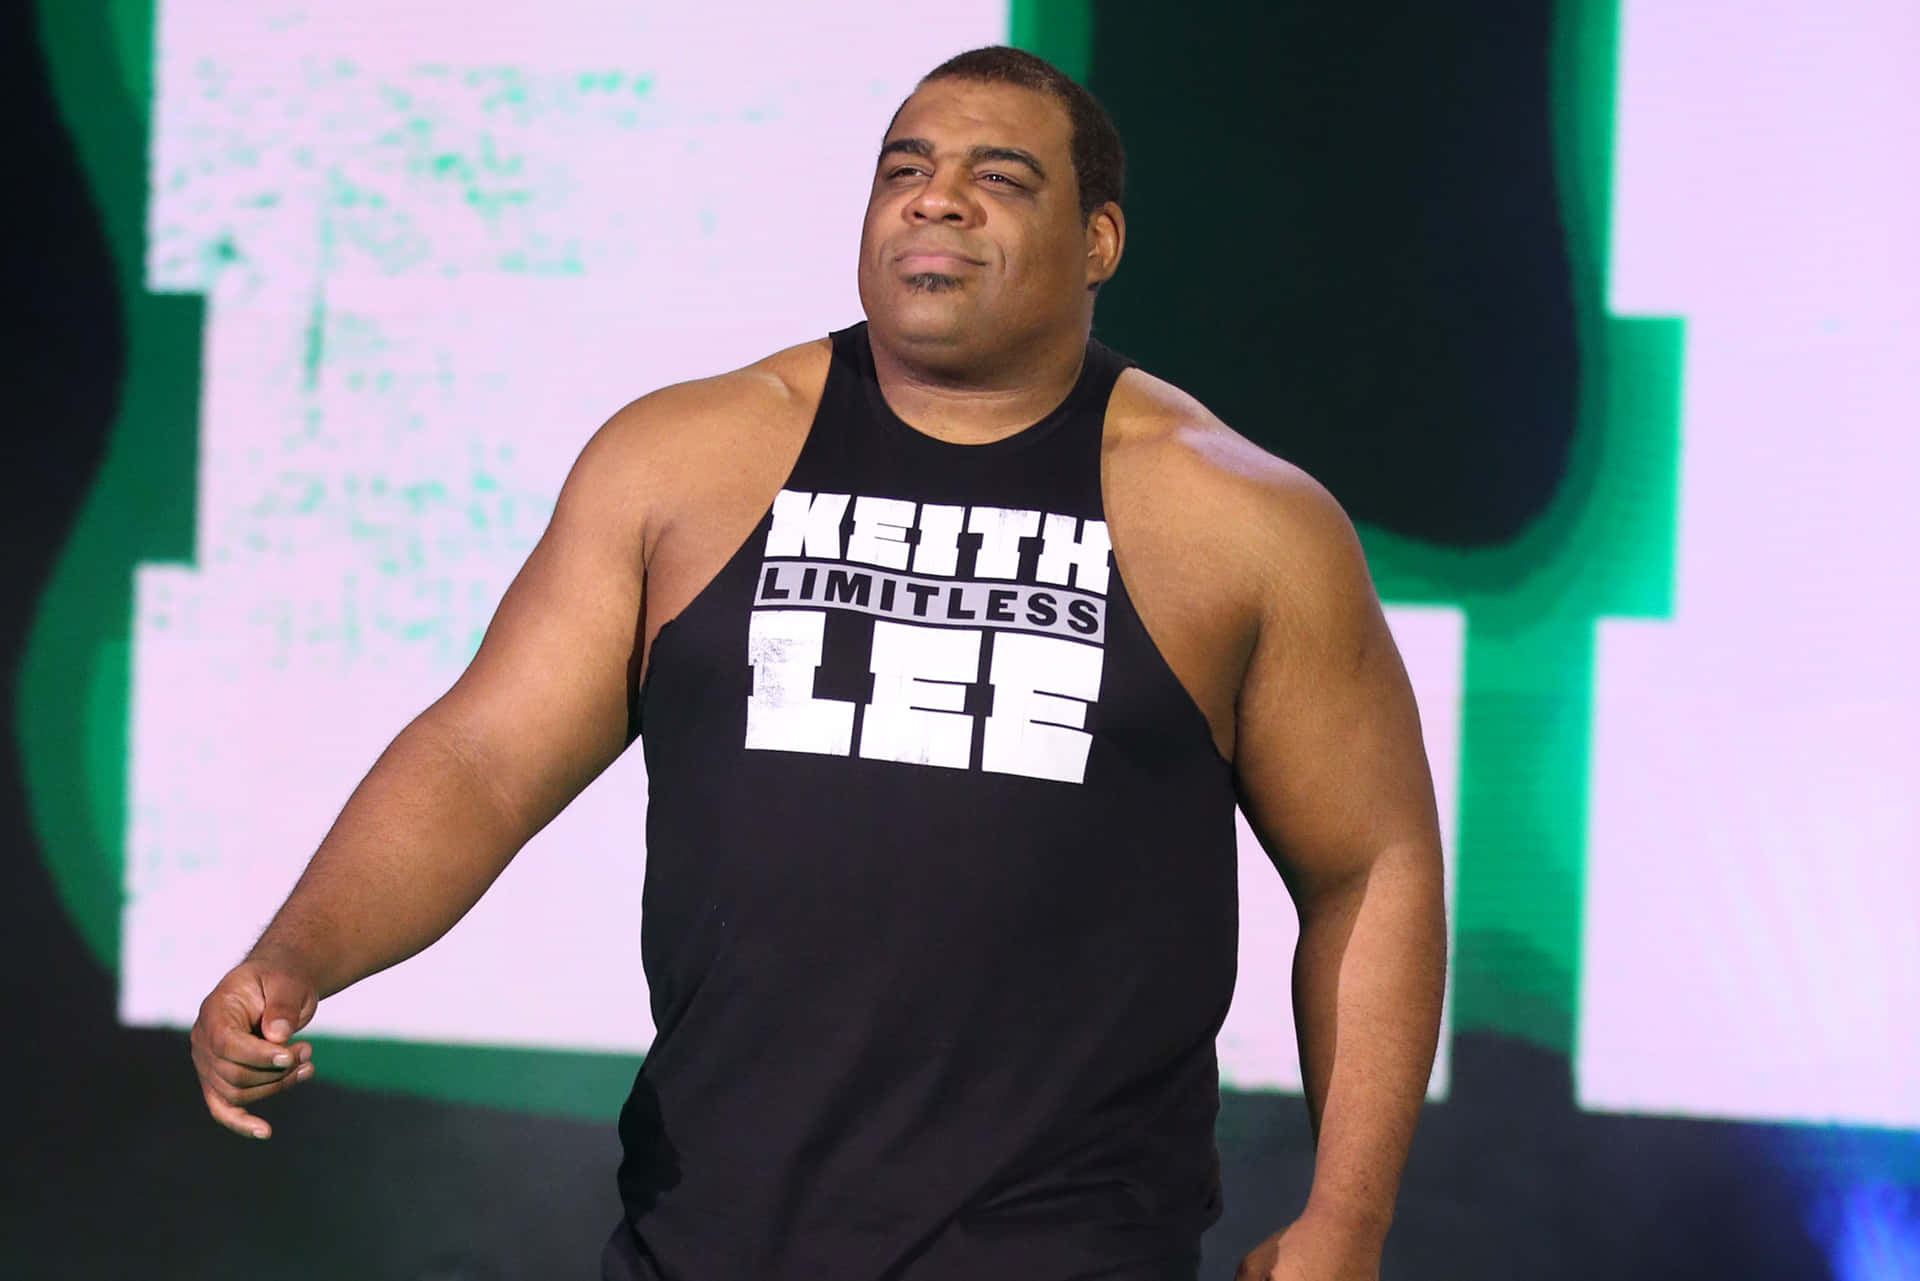 Keith Lee Limitless Black Singlet Aew Background